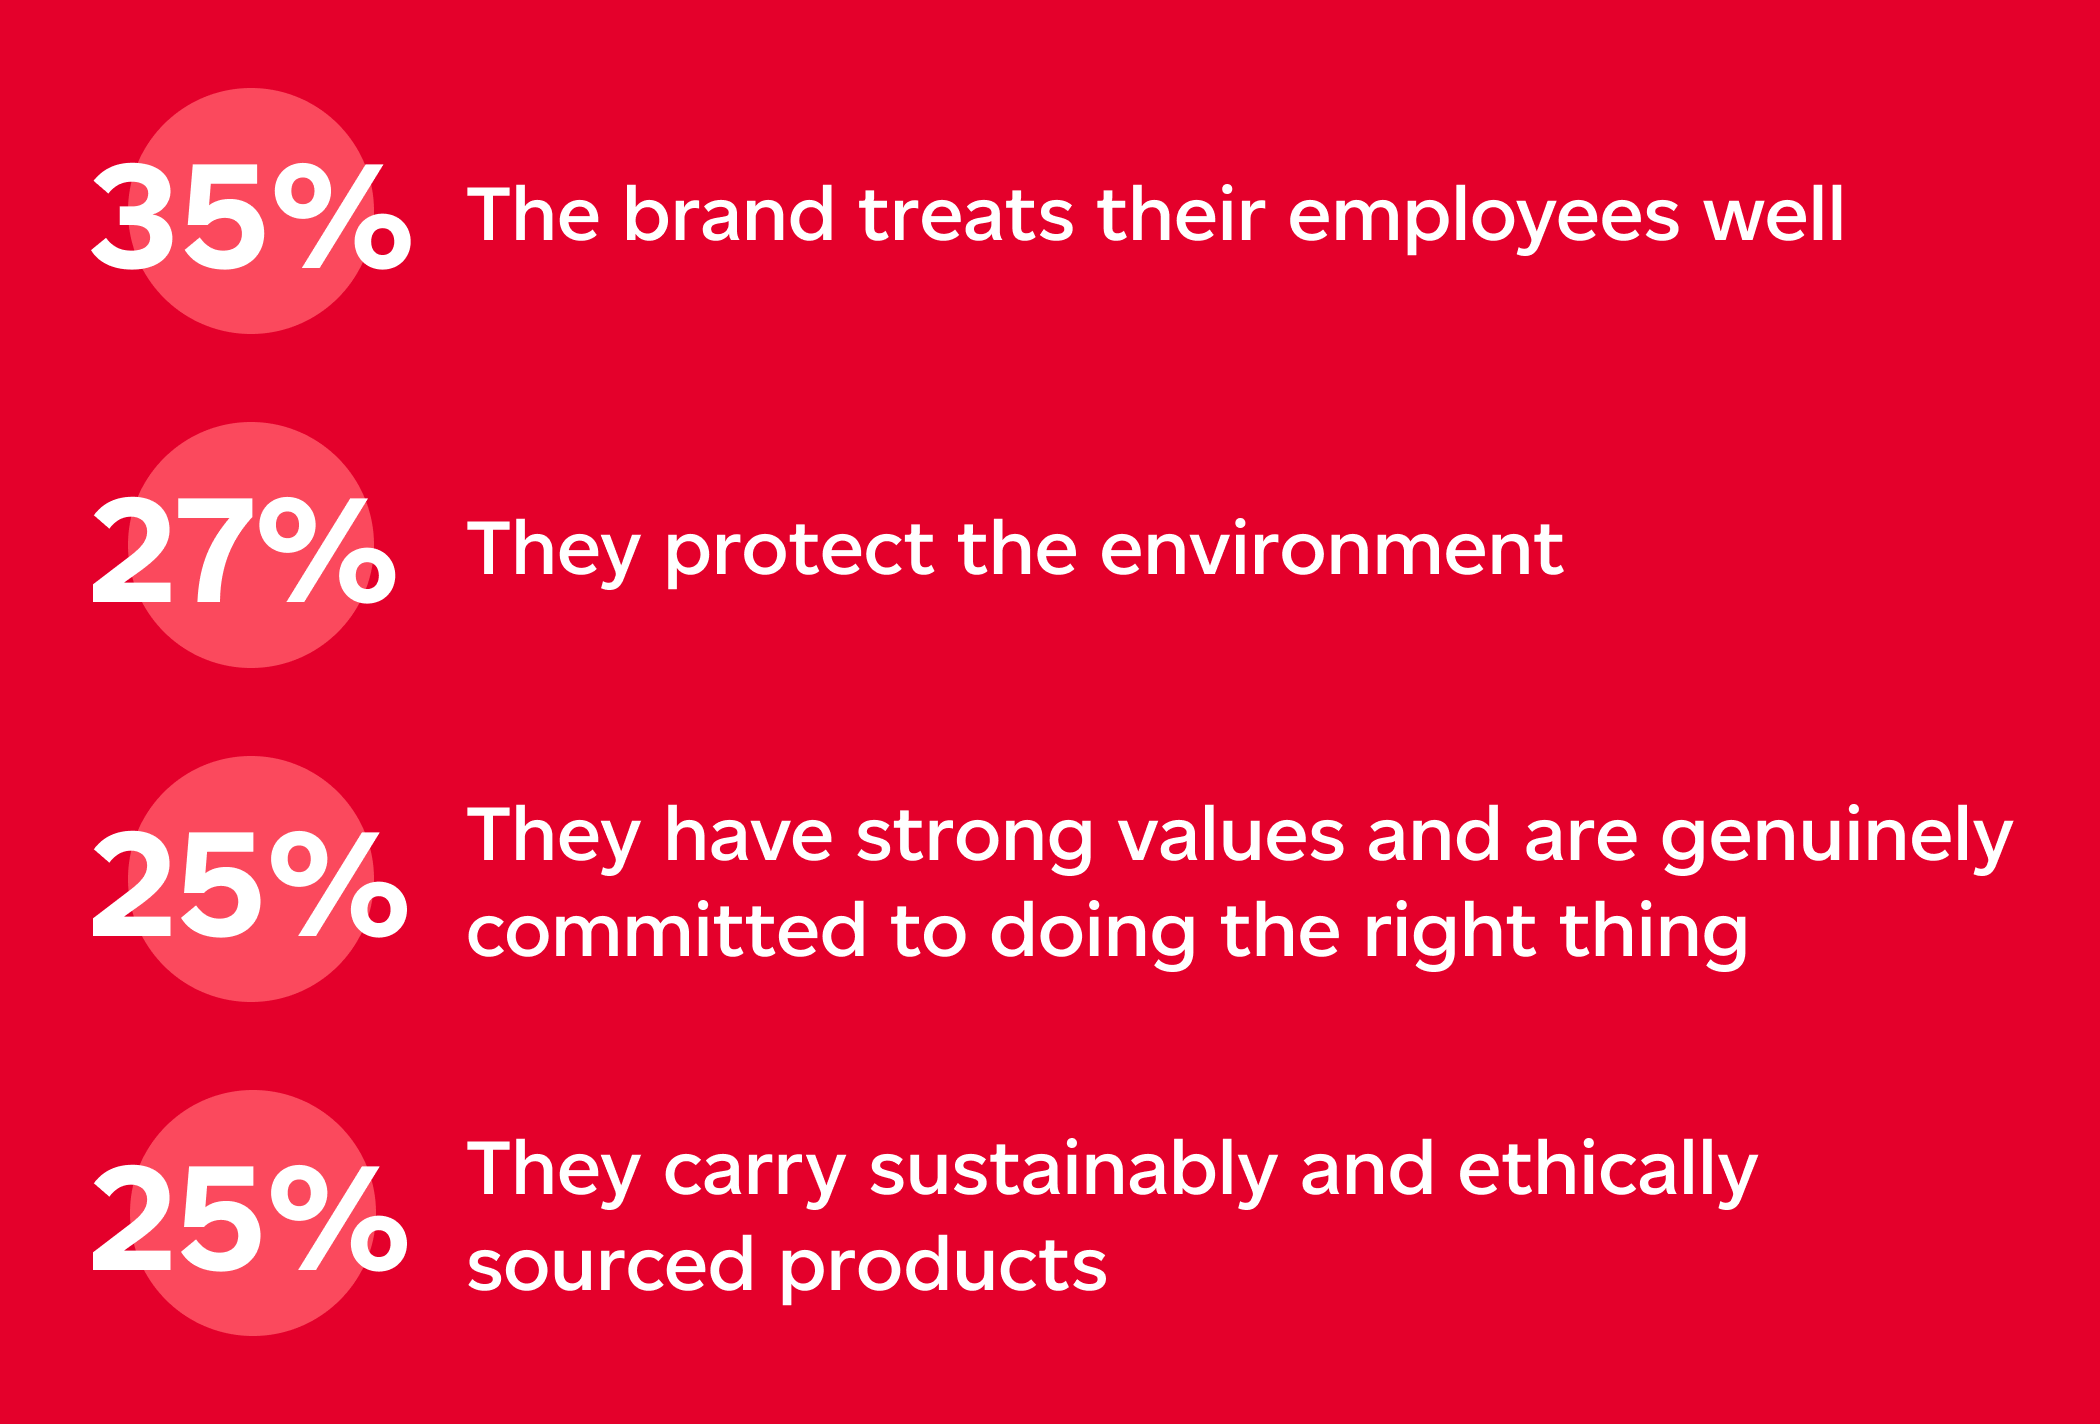 4 brand factors that shoppers keep top of mind when choosing where to shop online: the brand treats their employees well (35%), they protect the environment (27%), they have strong values and are genuinely committed to doing the right thing (25%), they carry sustainably and ethically sourced products (25%). Statistics courtesy of Phase 5, Canadian Online Shopper Study, May 2022.